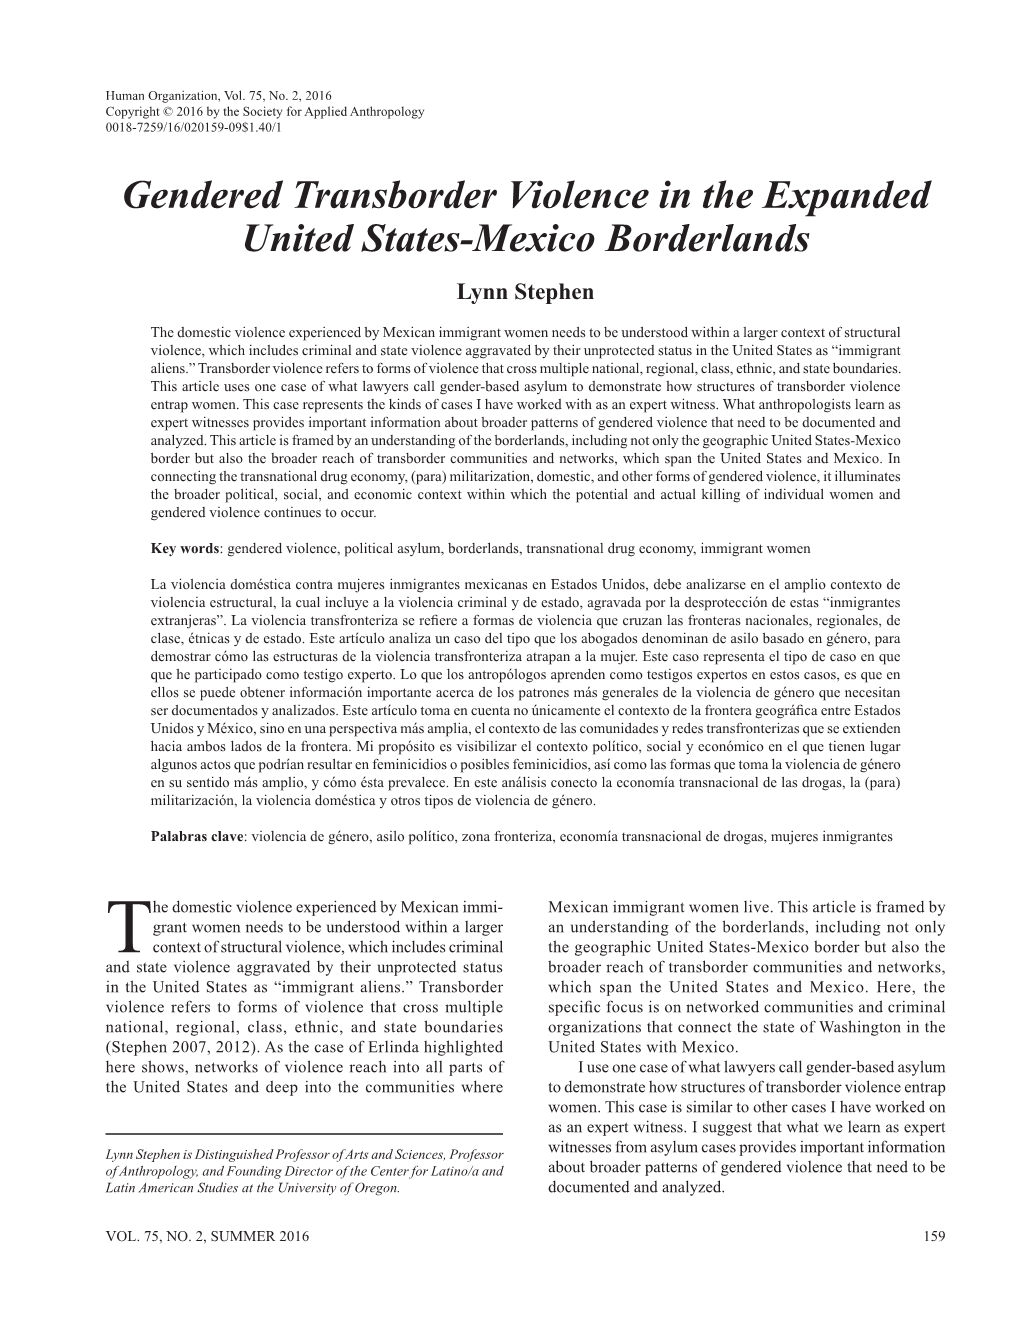 Gendered Transborder Violence in the Expanded United States-Mexico Borderlands Lynn Stephen